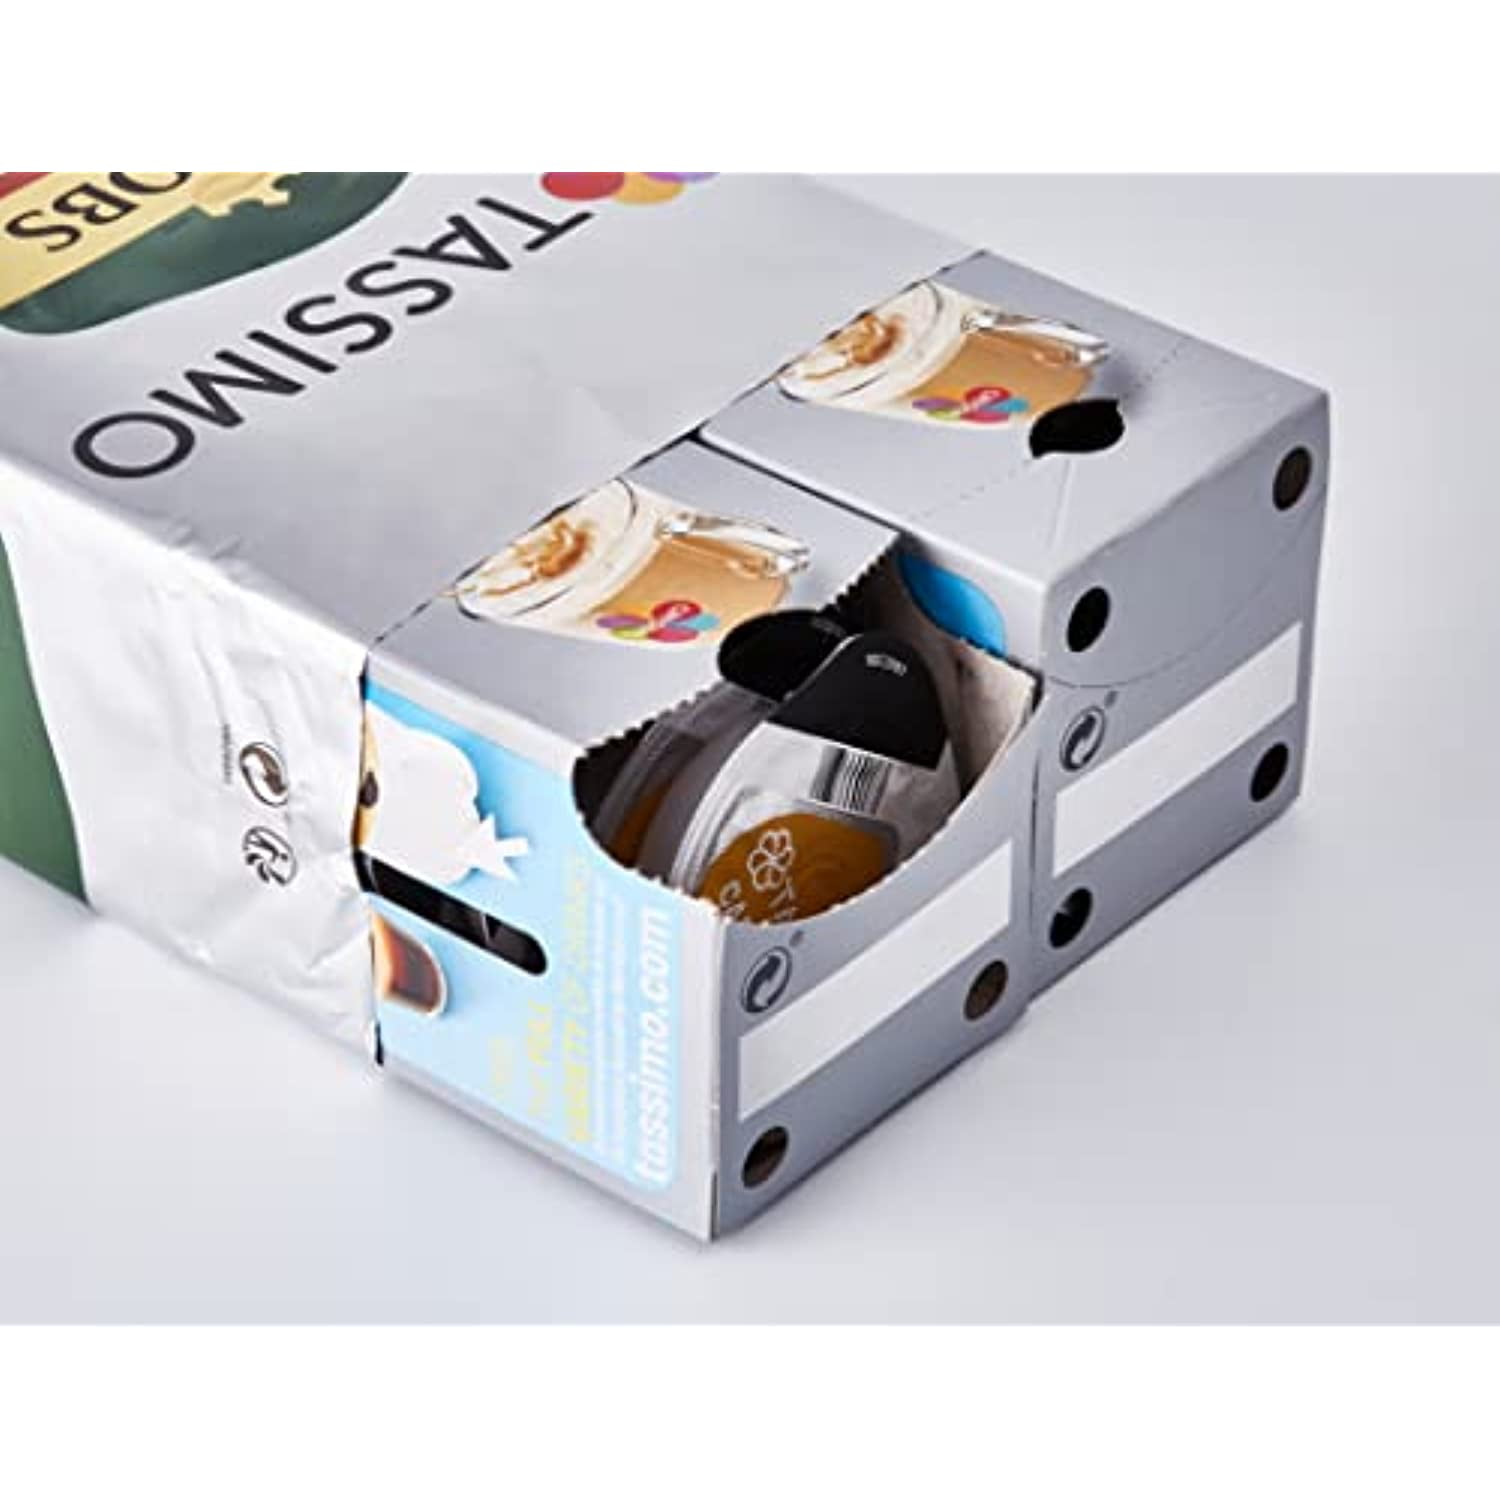 JACOBS Columbus Lungo Tassimo Compatible Coffee Capsules Box 16 Drinks